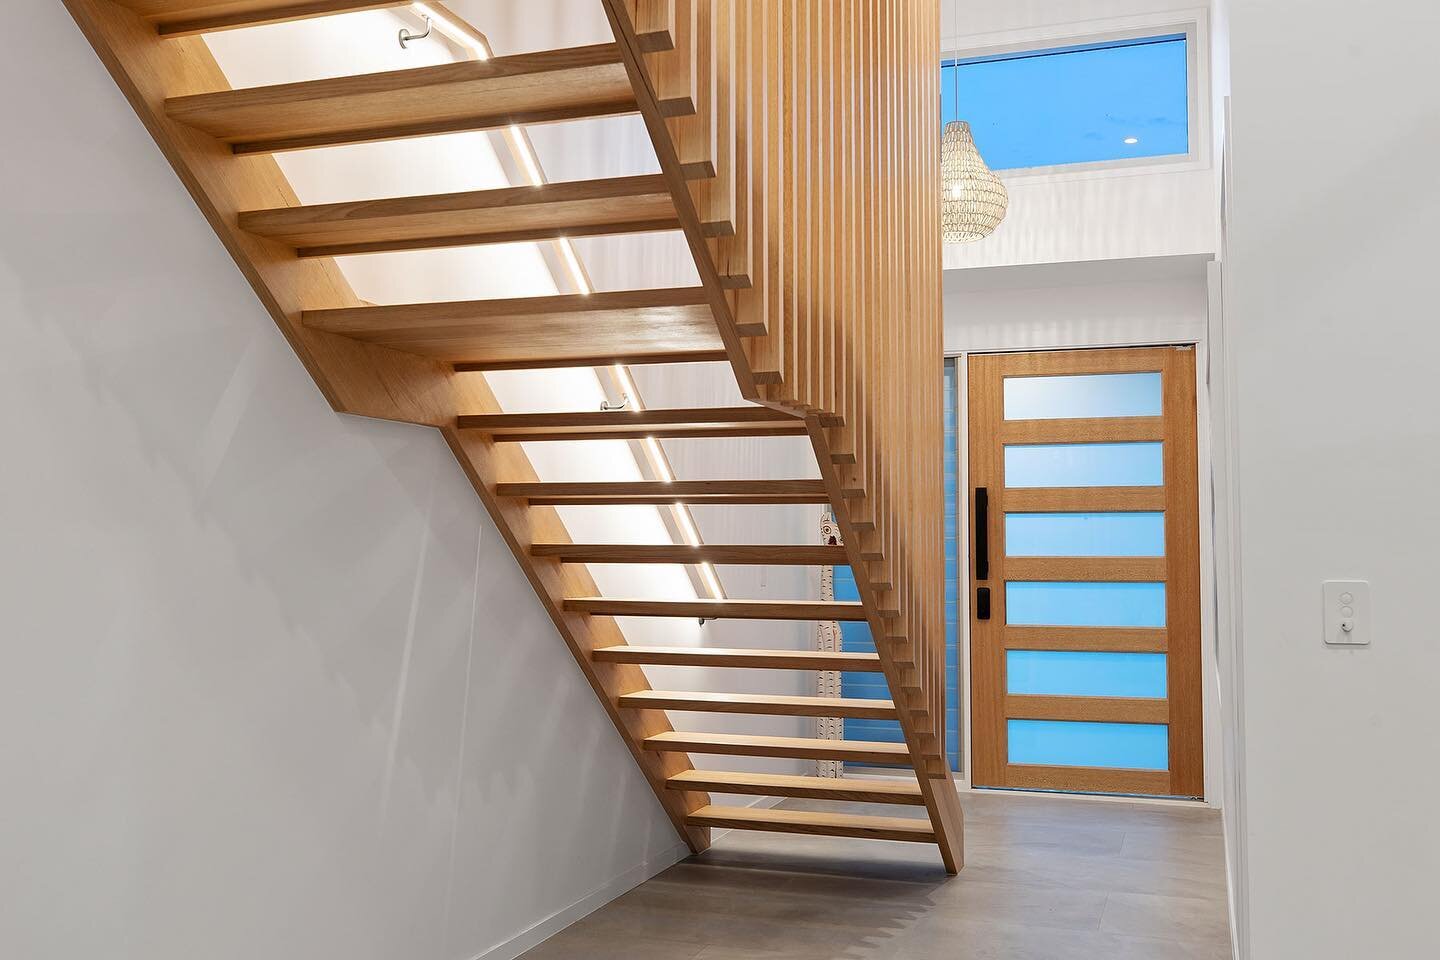 This stunning staircase deserves a little extra lighting. The LED strip hidden under its handrail shows off the natural beauty of the woods character. 

Electrical &bull; @bwelectricalanddata 
Builder &bull; @seachangebuilders